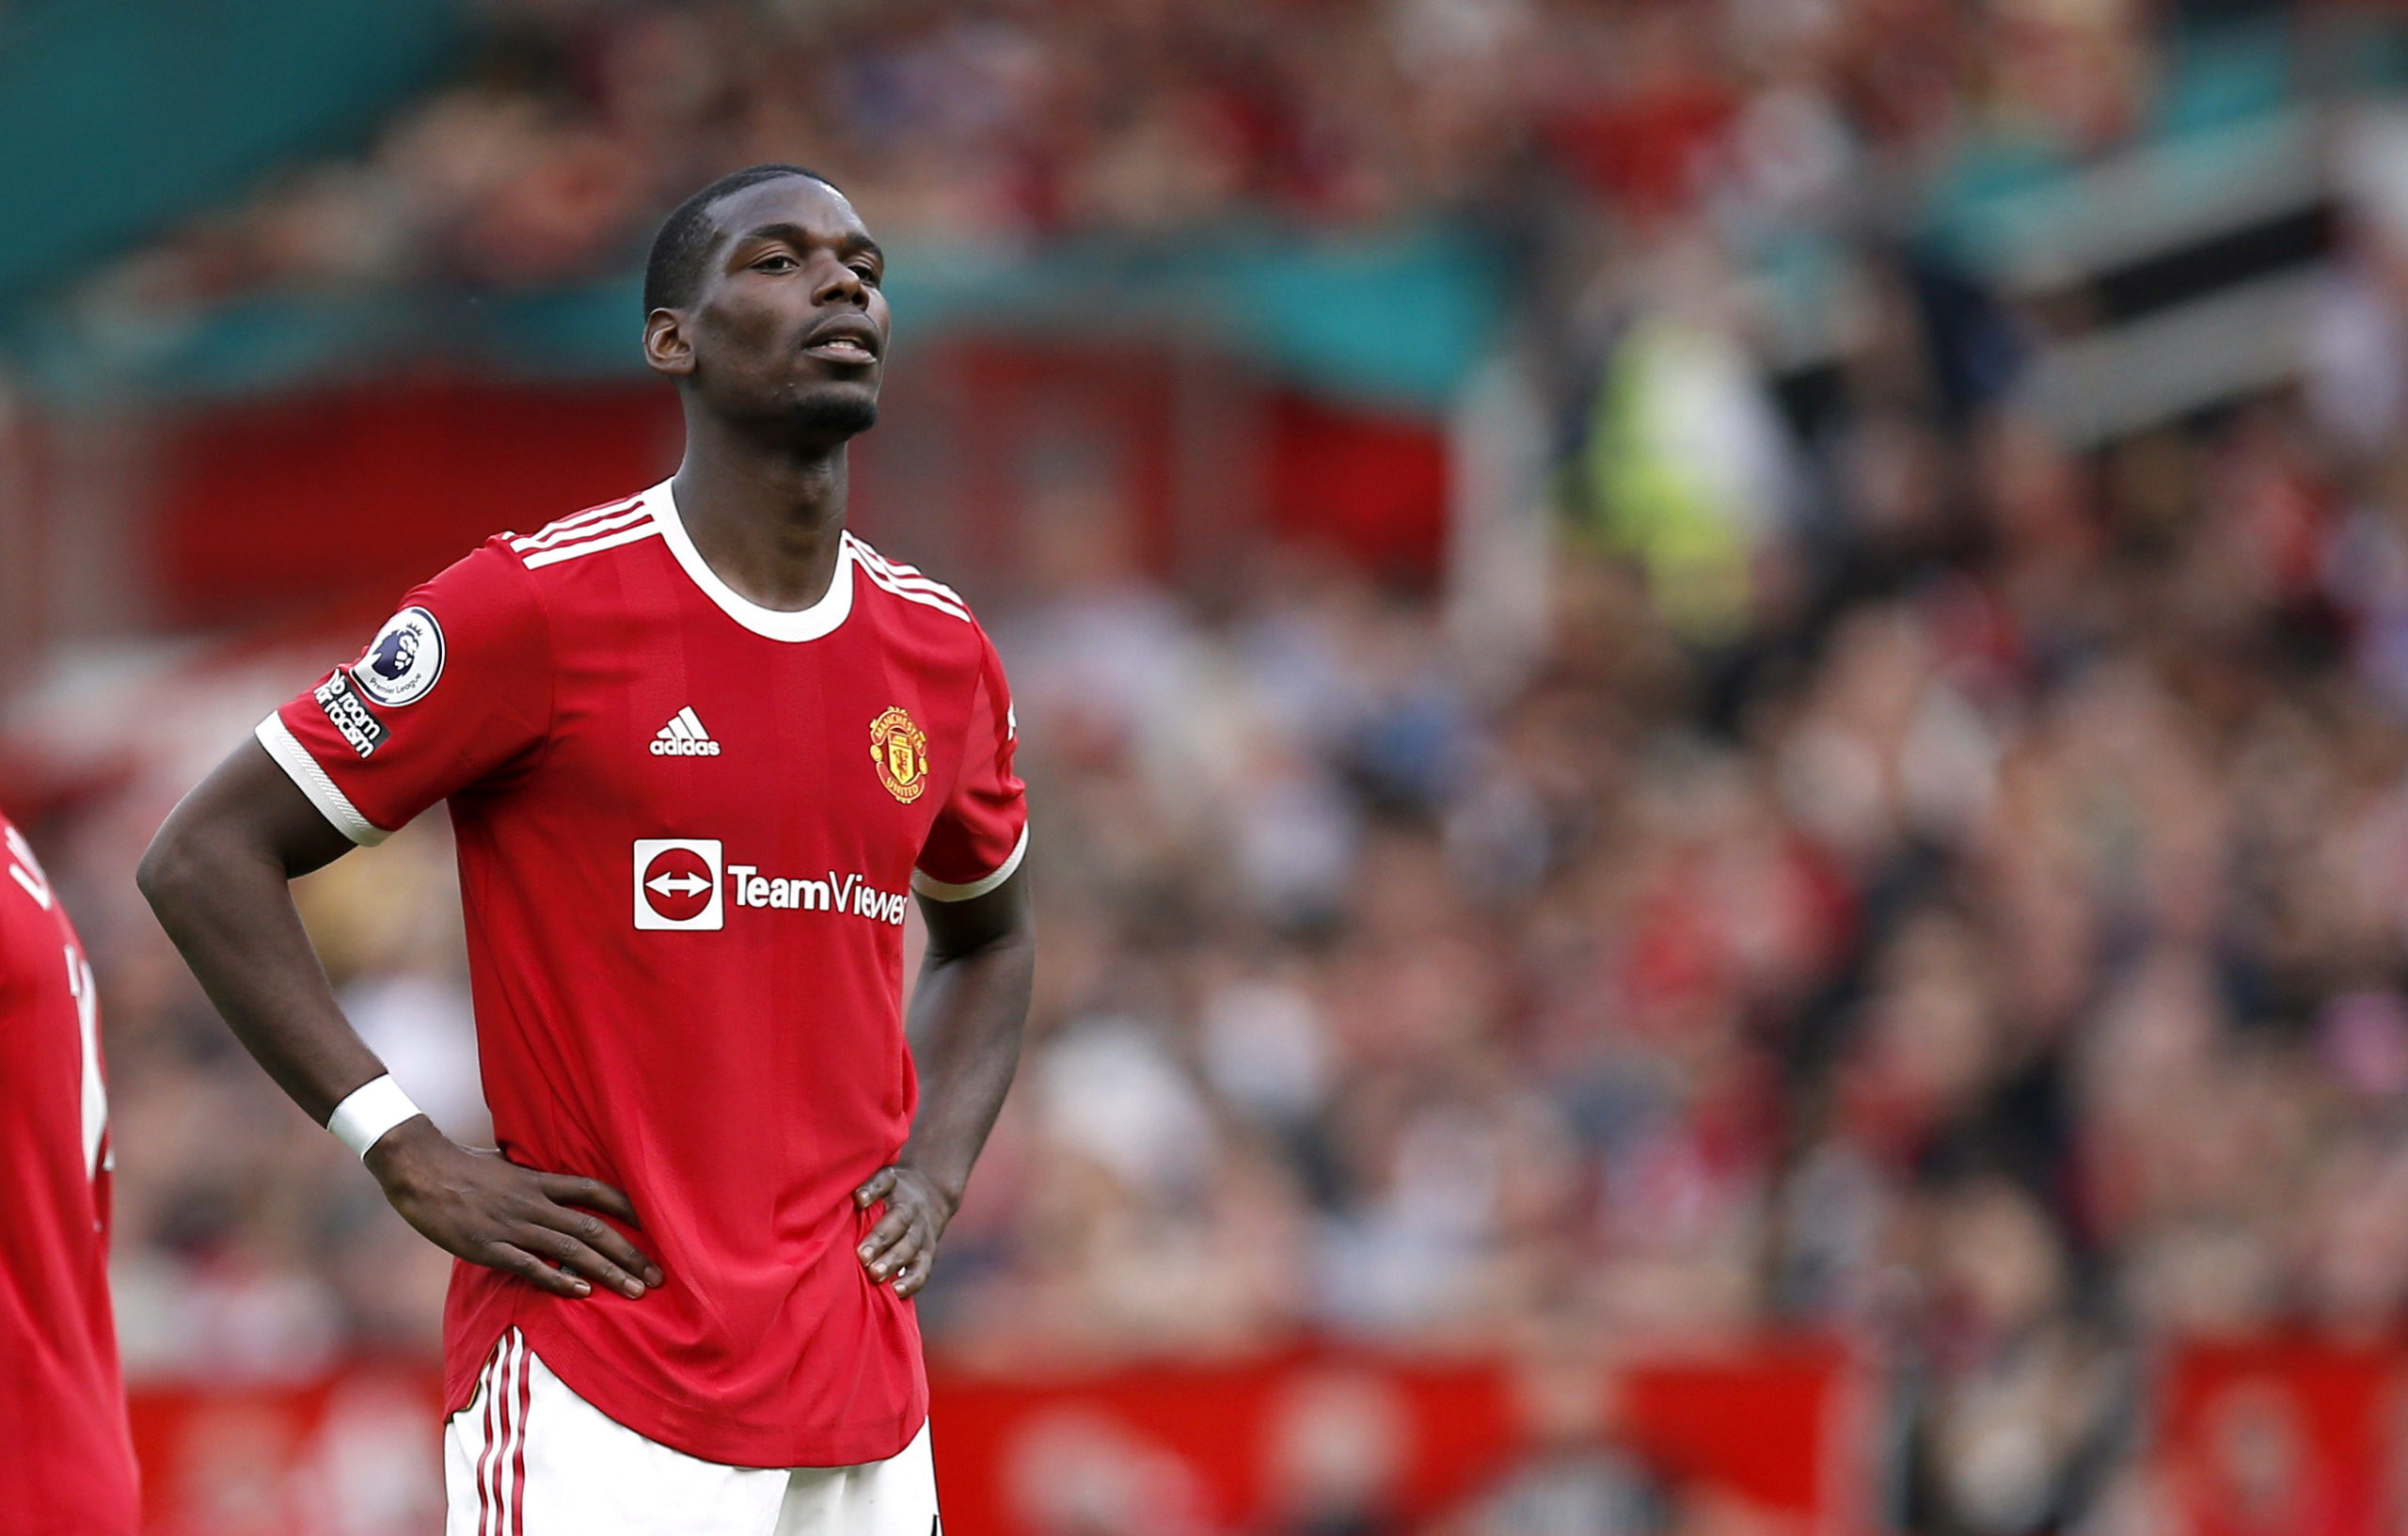 FILE PHOTO: Football Football - English Premier League - Manchester United v Norwich City - Old Trafford, Manchester, England - April 16, 2022 Manchester United's Paul Pogba reacts REUTERS / Craig Brough